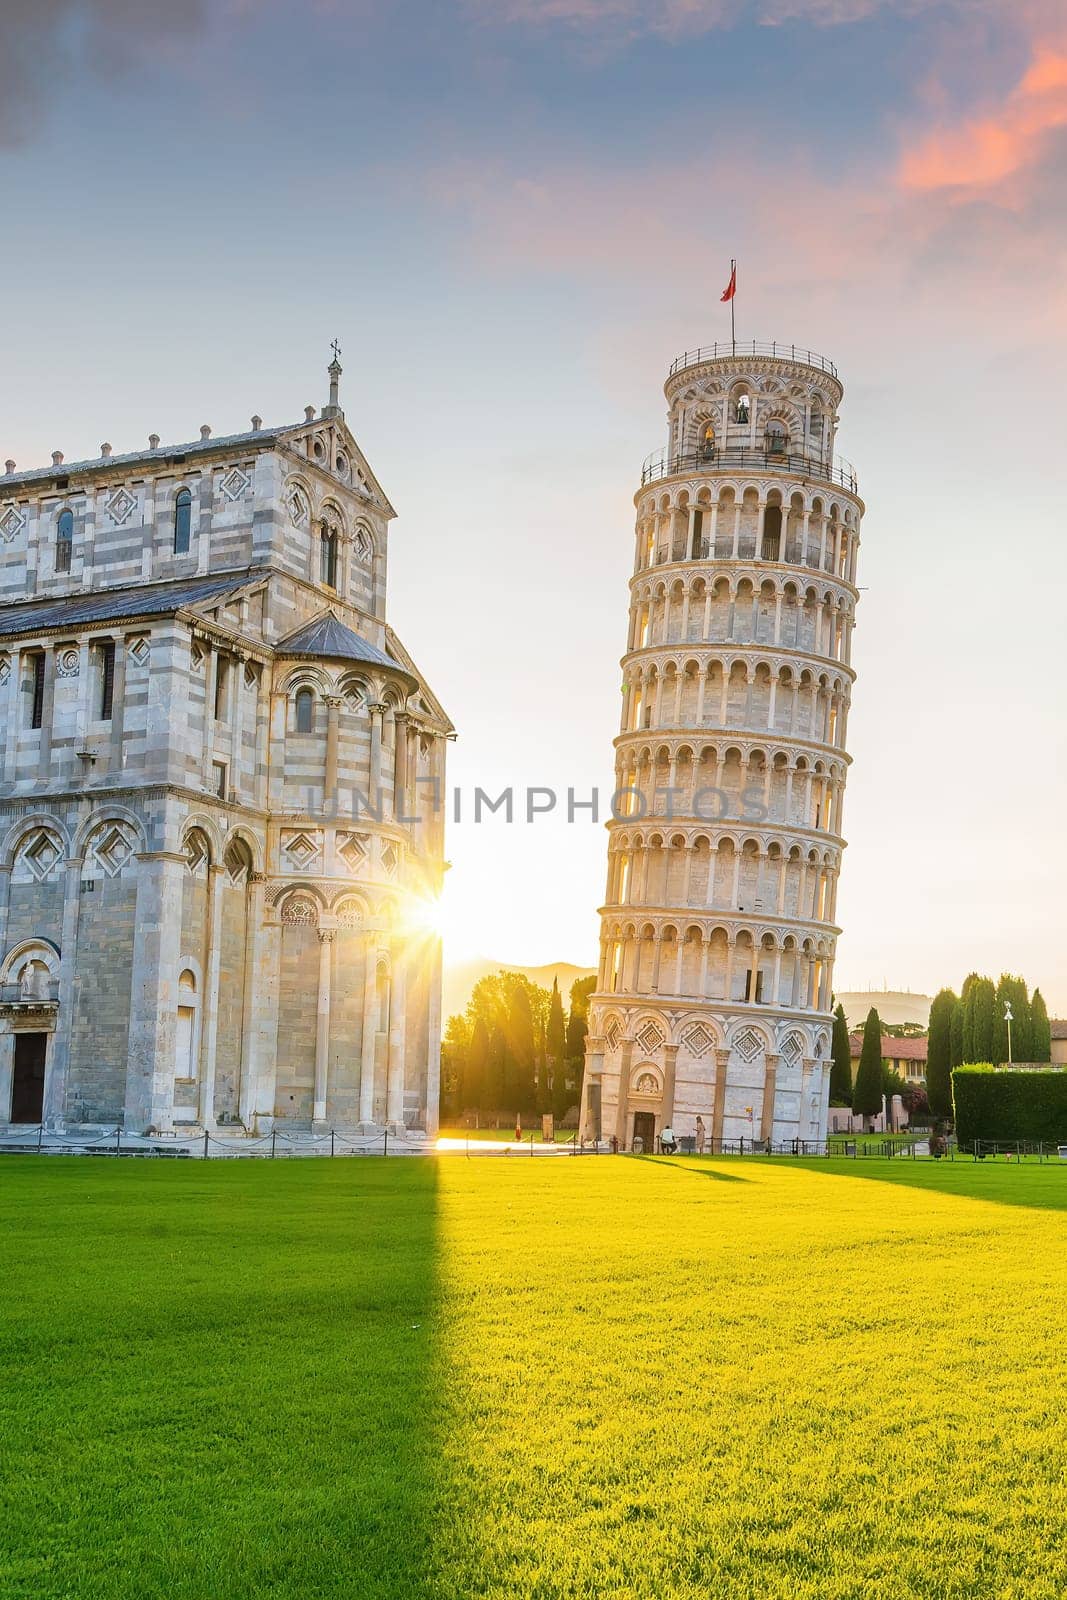 The Leaning Tower in Pisa, Italy with beautiful sunrise